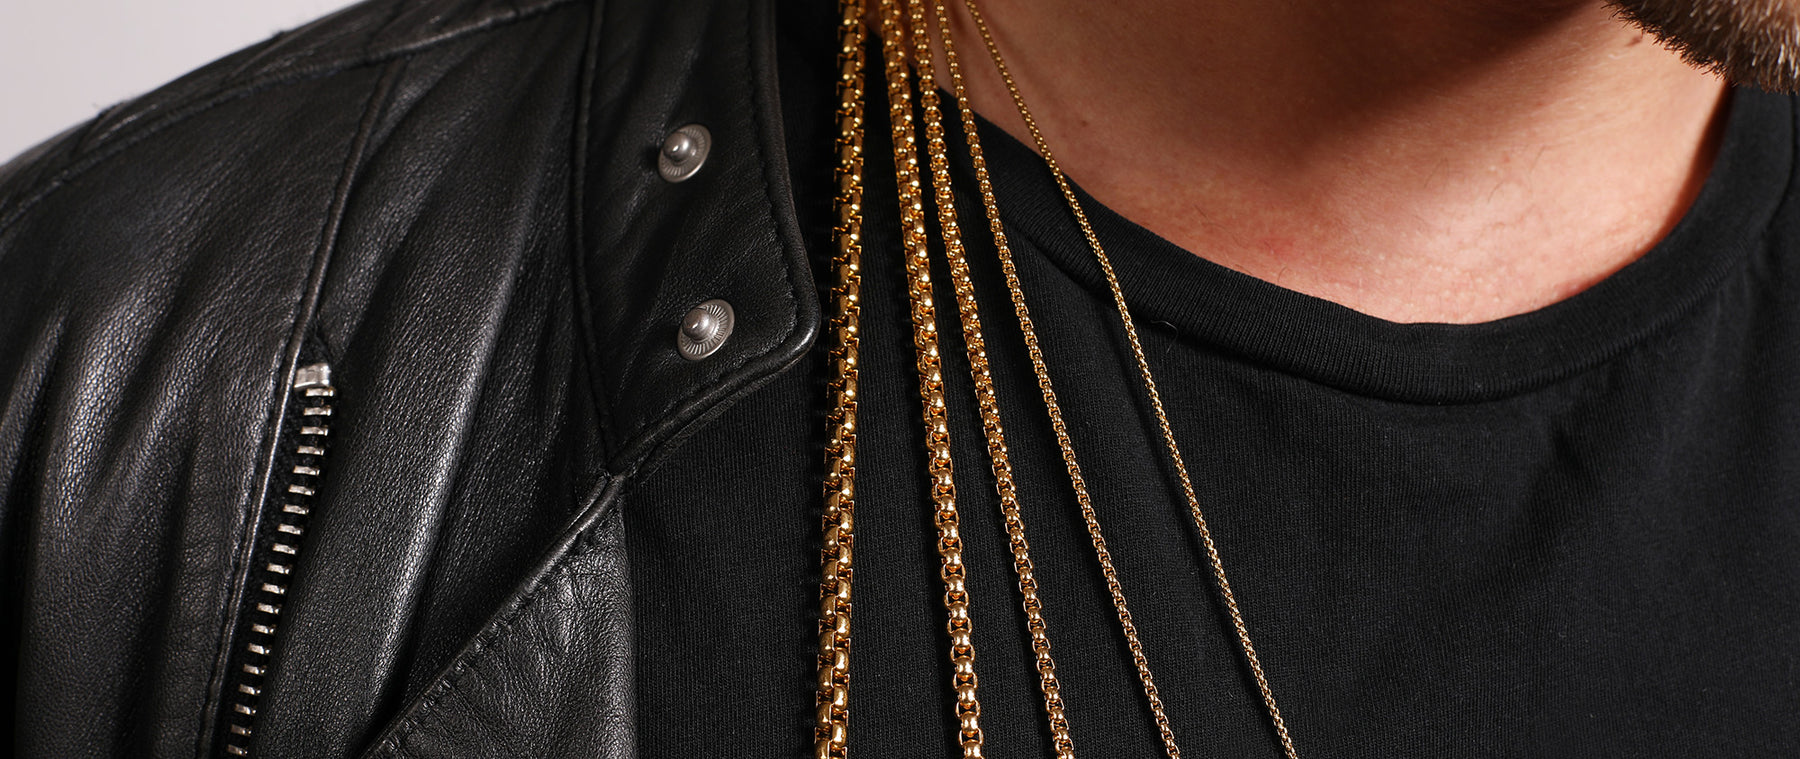 Difference between necklace chain thickness.